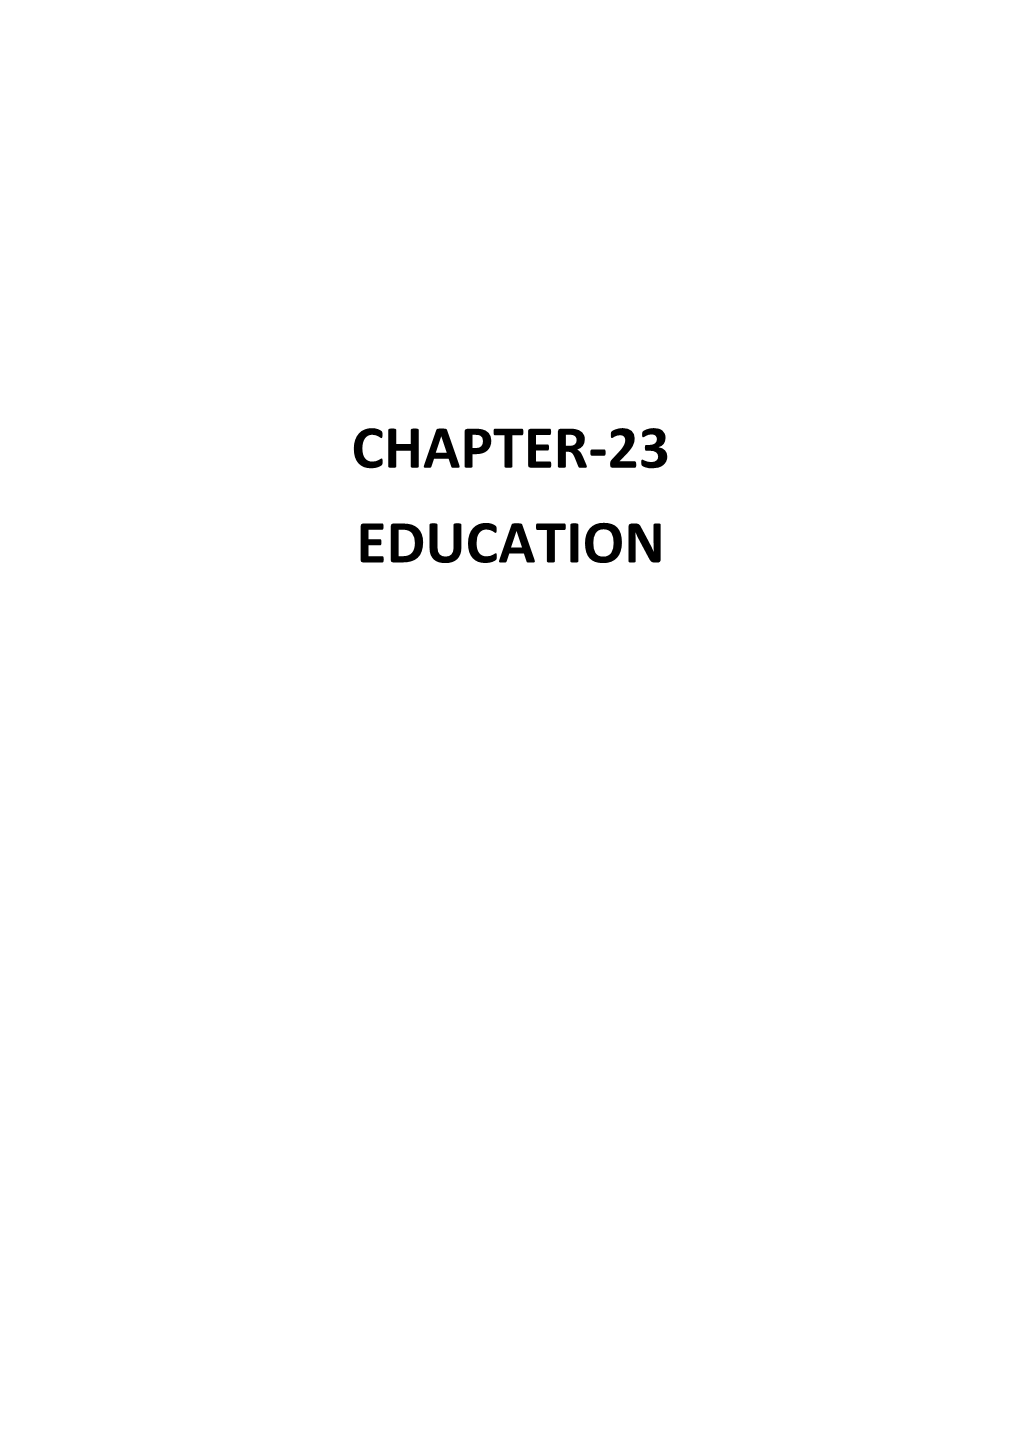 Chapter-23 Education